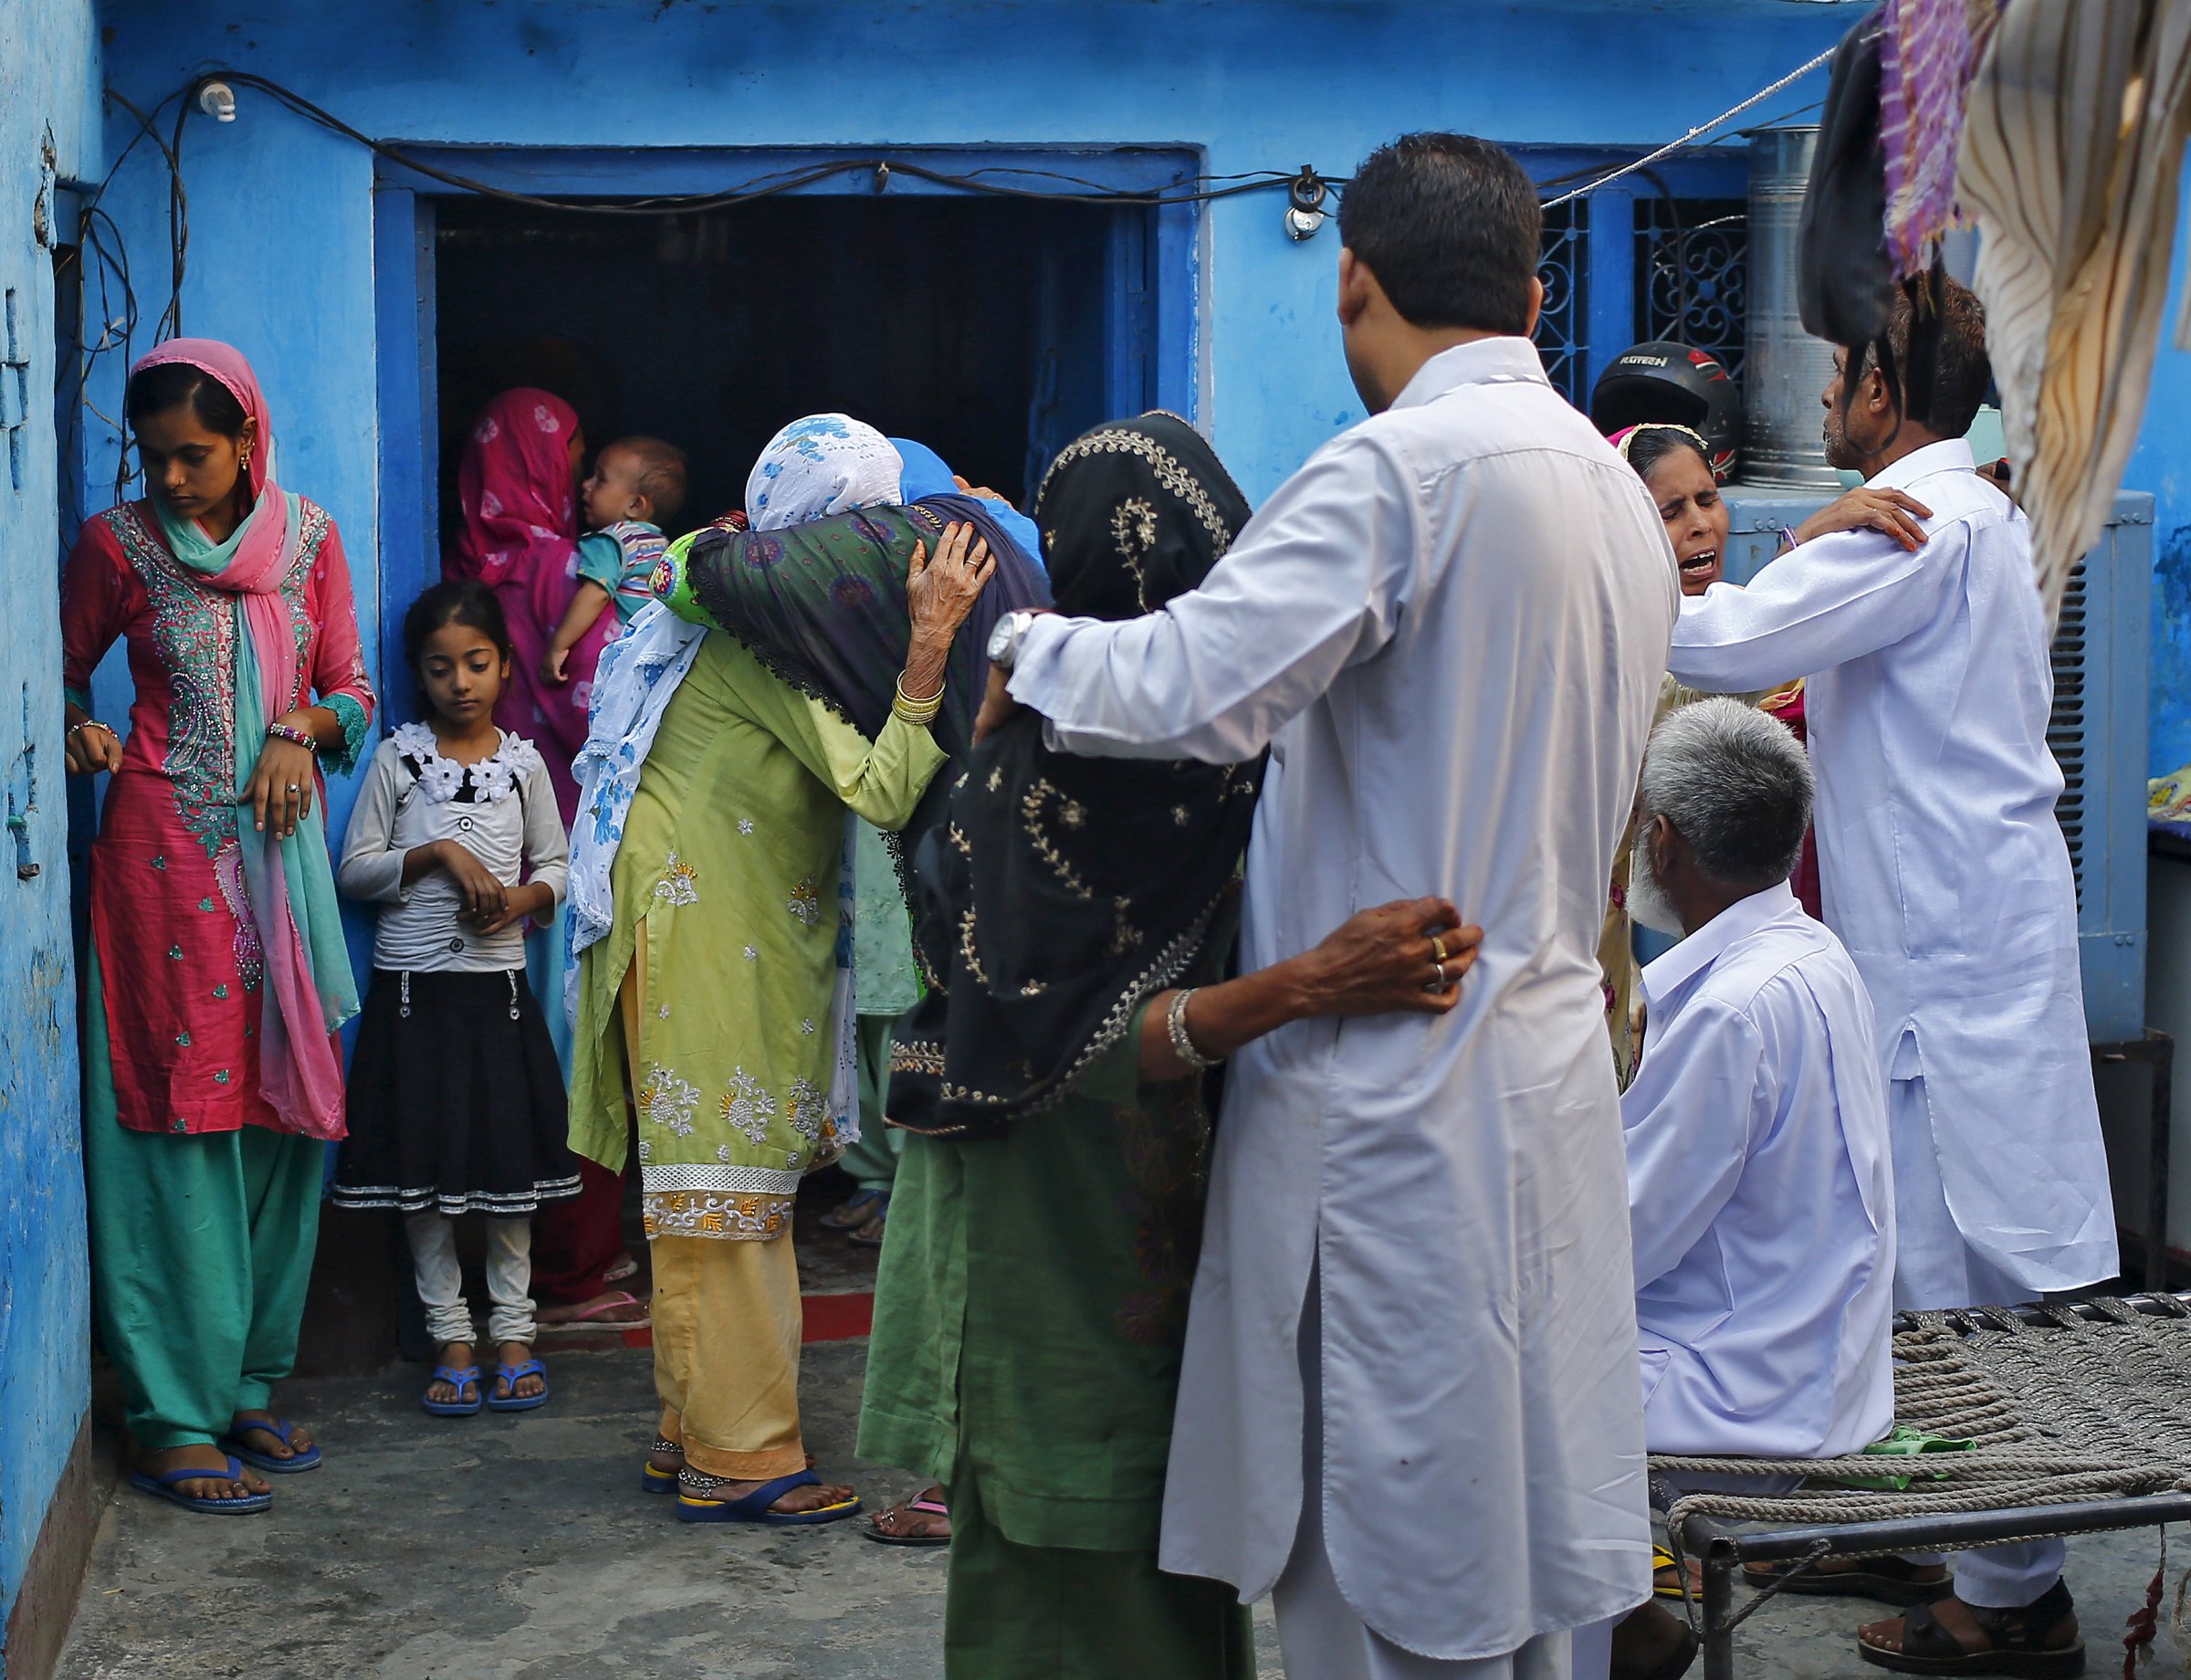 Relatives and family members of Saifi, who was killed by a mob, mourn his death at Bisara village in Uttar Pradesh